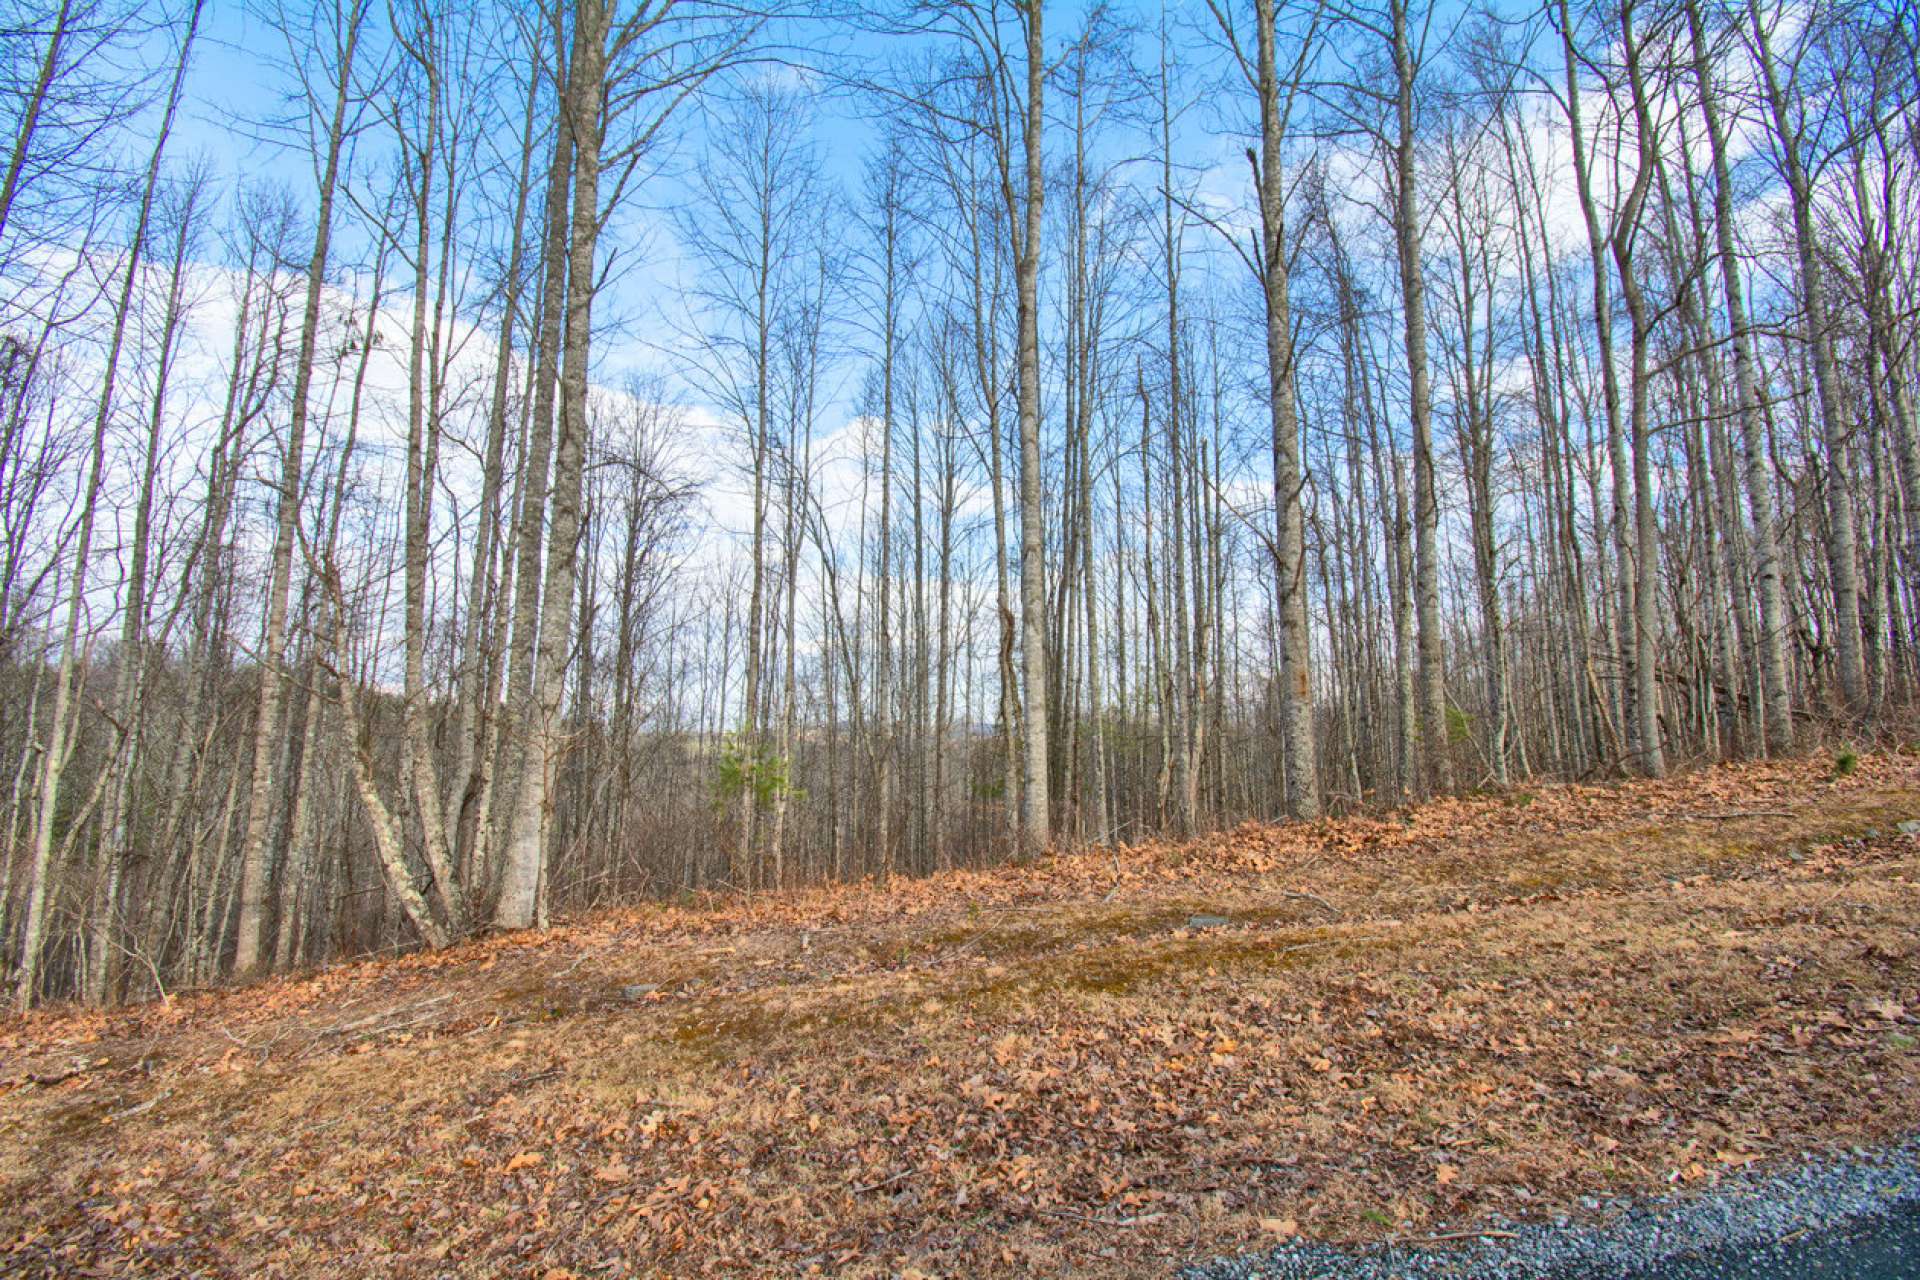 Consider Lot 22, a beautiful 0.67 acre homesite now available.